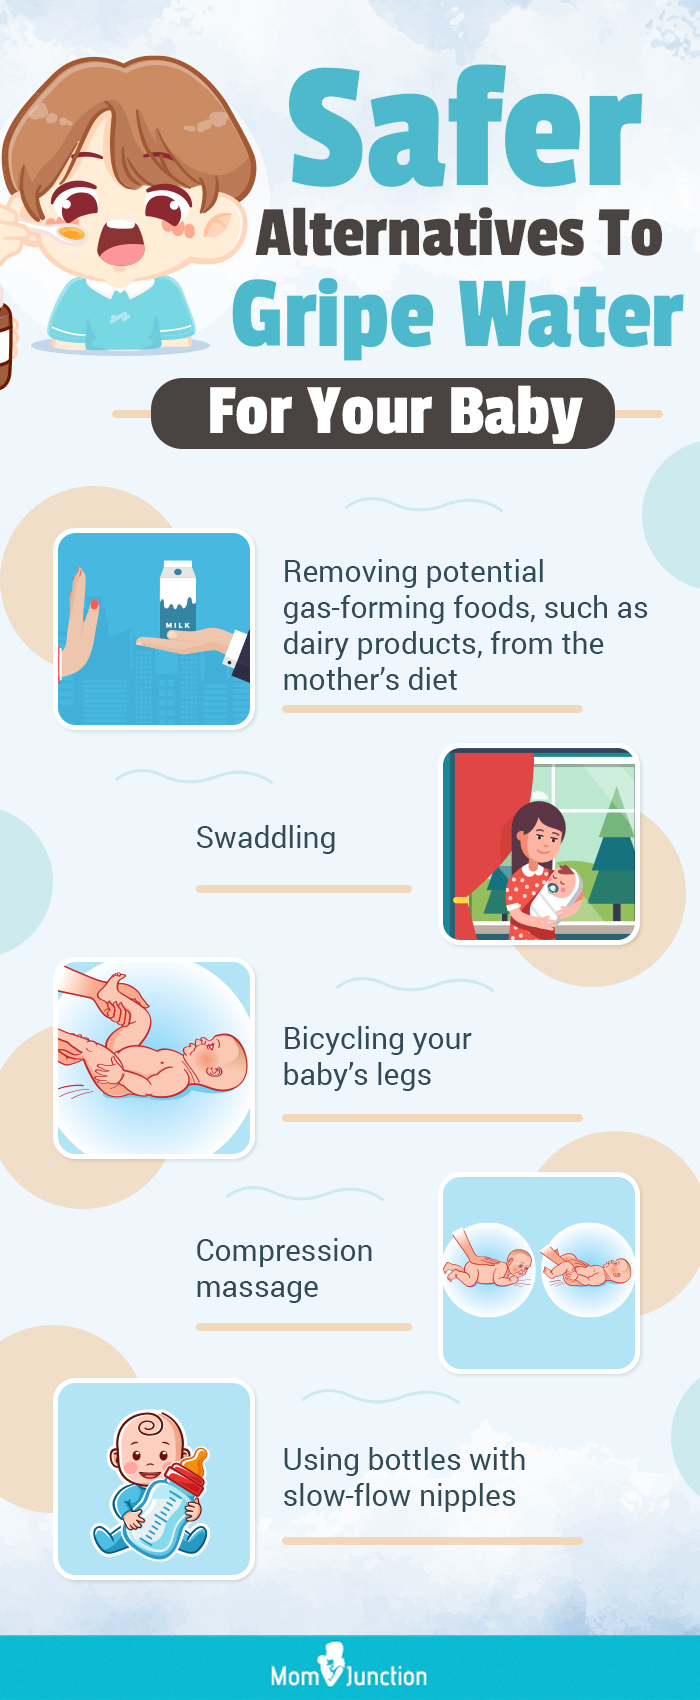 safer alternatives to gripe water for your baby(infographic)